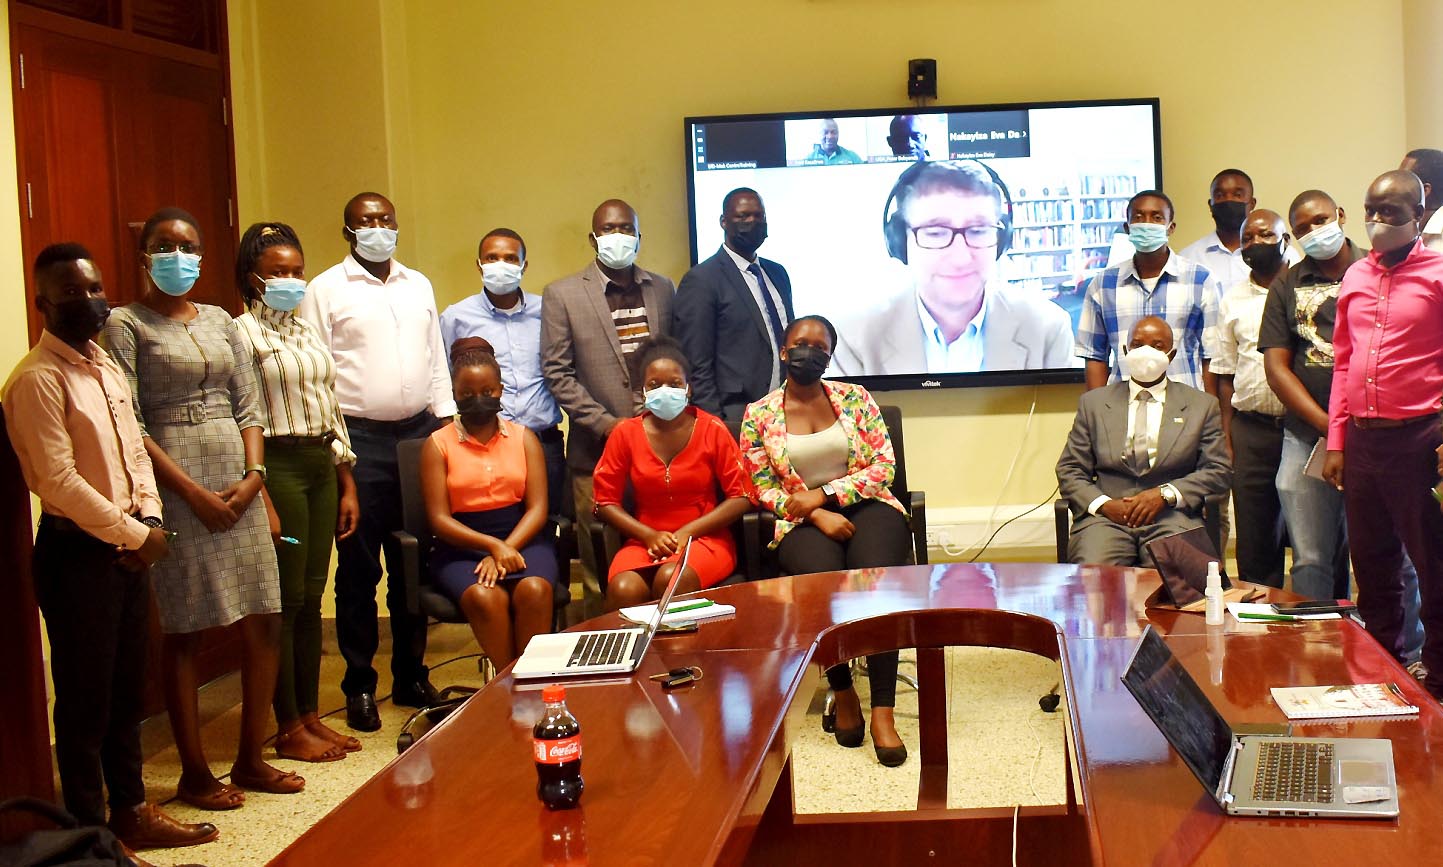 EfD-Mak Director Prof. Edward Bbaale (Seated Right) and some of the participants pose for a group photo with the facilitator Dr. David Fuente (On screen) after the training on 14th October 2021, CTF2, Makerere University.